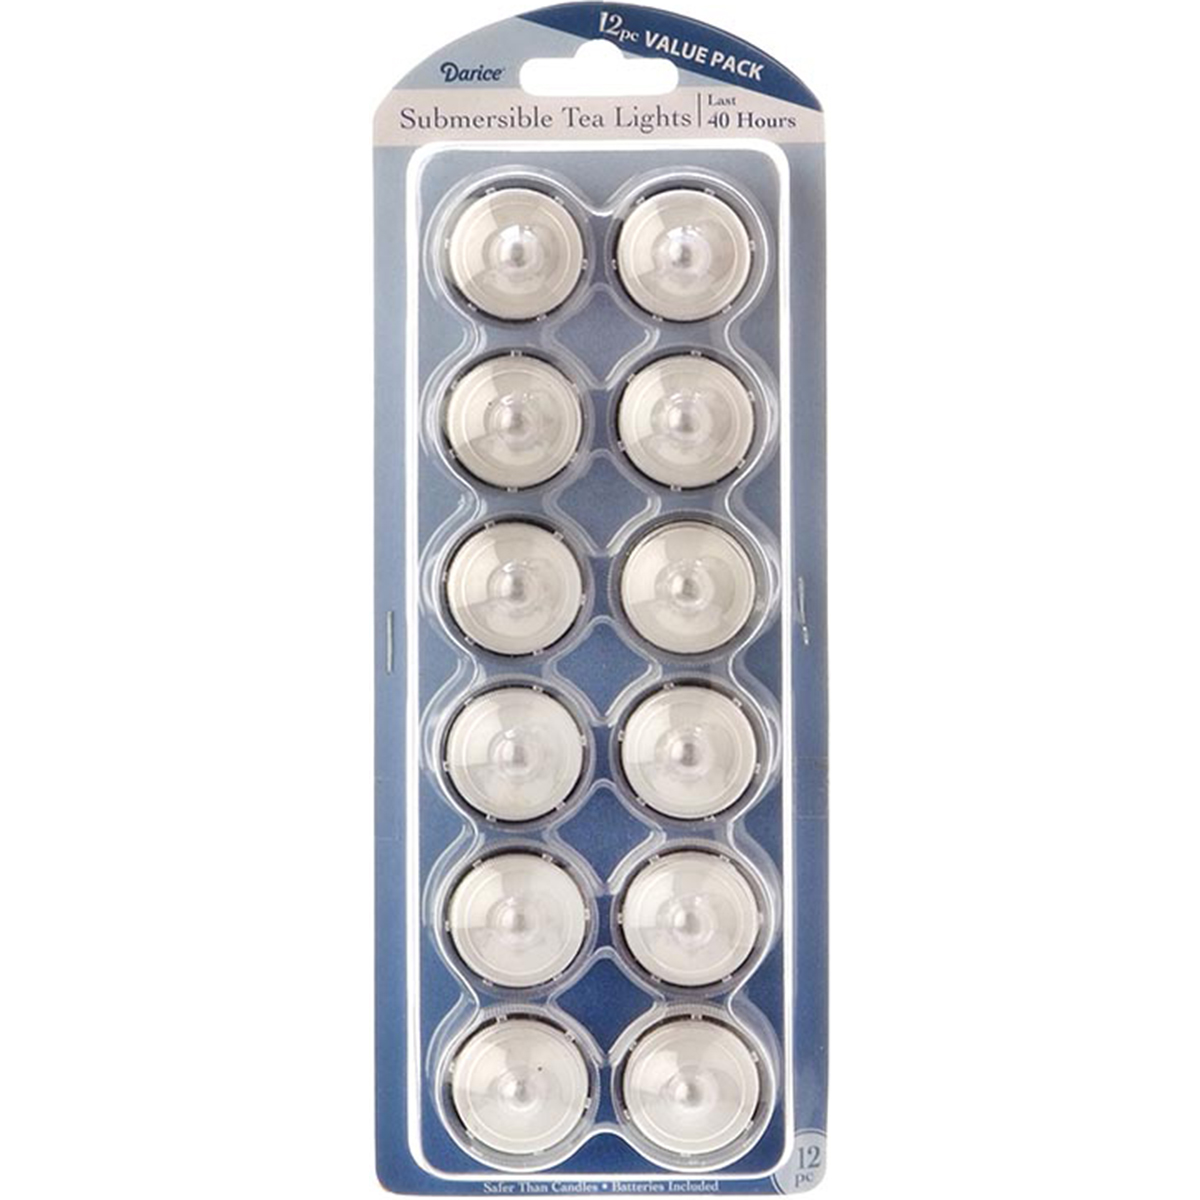 Battery Operated Submersible Tea Lights, White - Pack Of 12